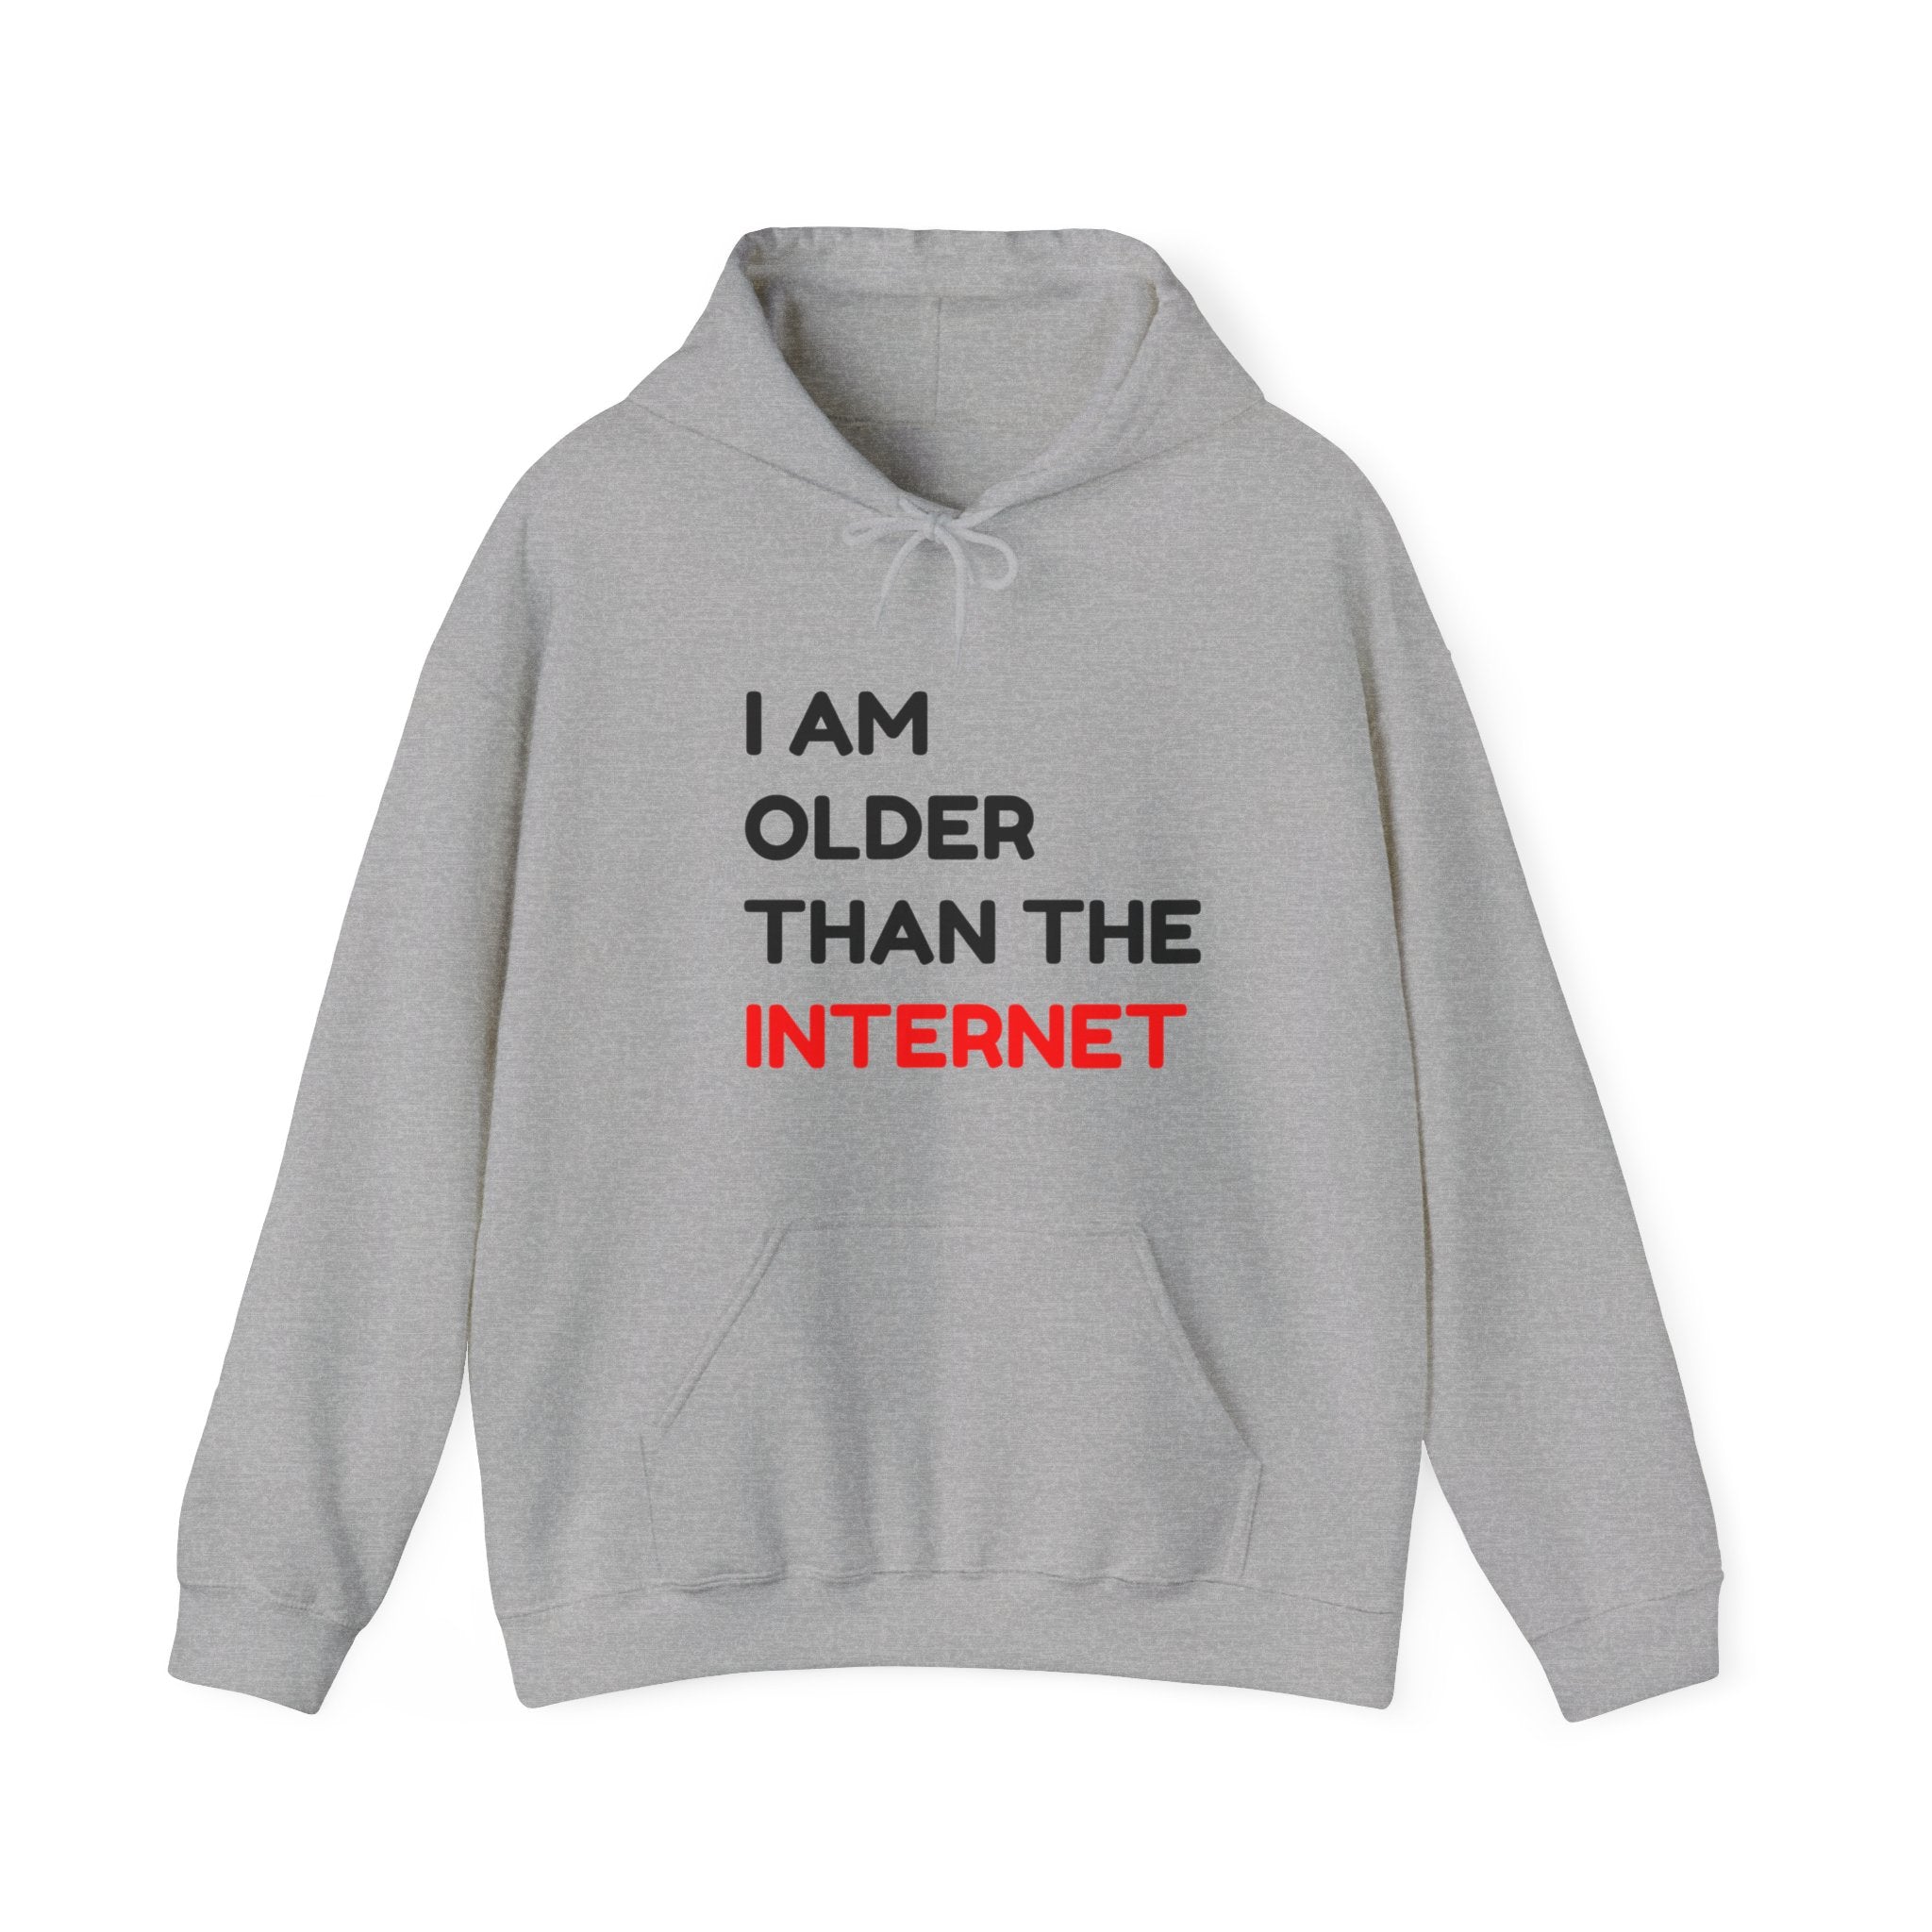 A cozy gray I am Older Than the Internet - Hooded Sweatshirt featuring the text "I AM OLDER THAN THE INTERNET," with "INTERNET" highlighted in bold red.